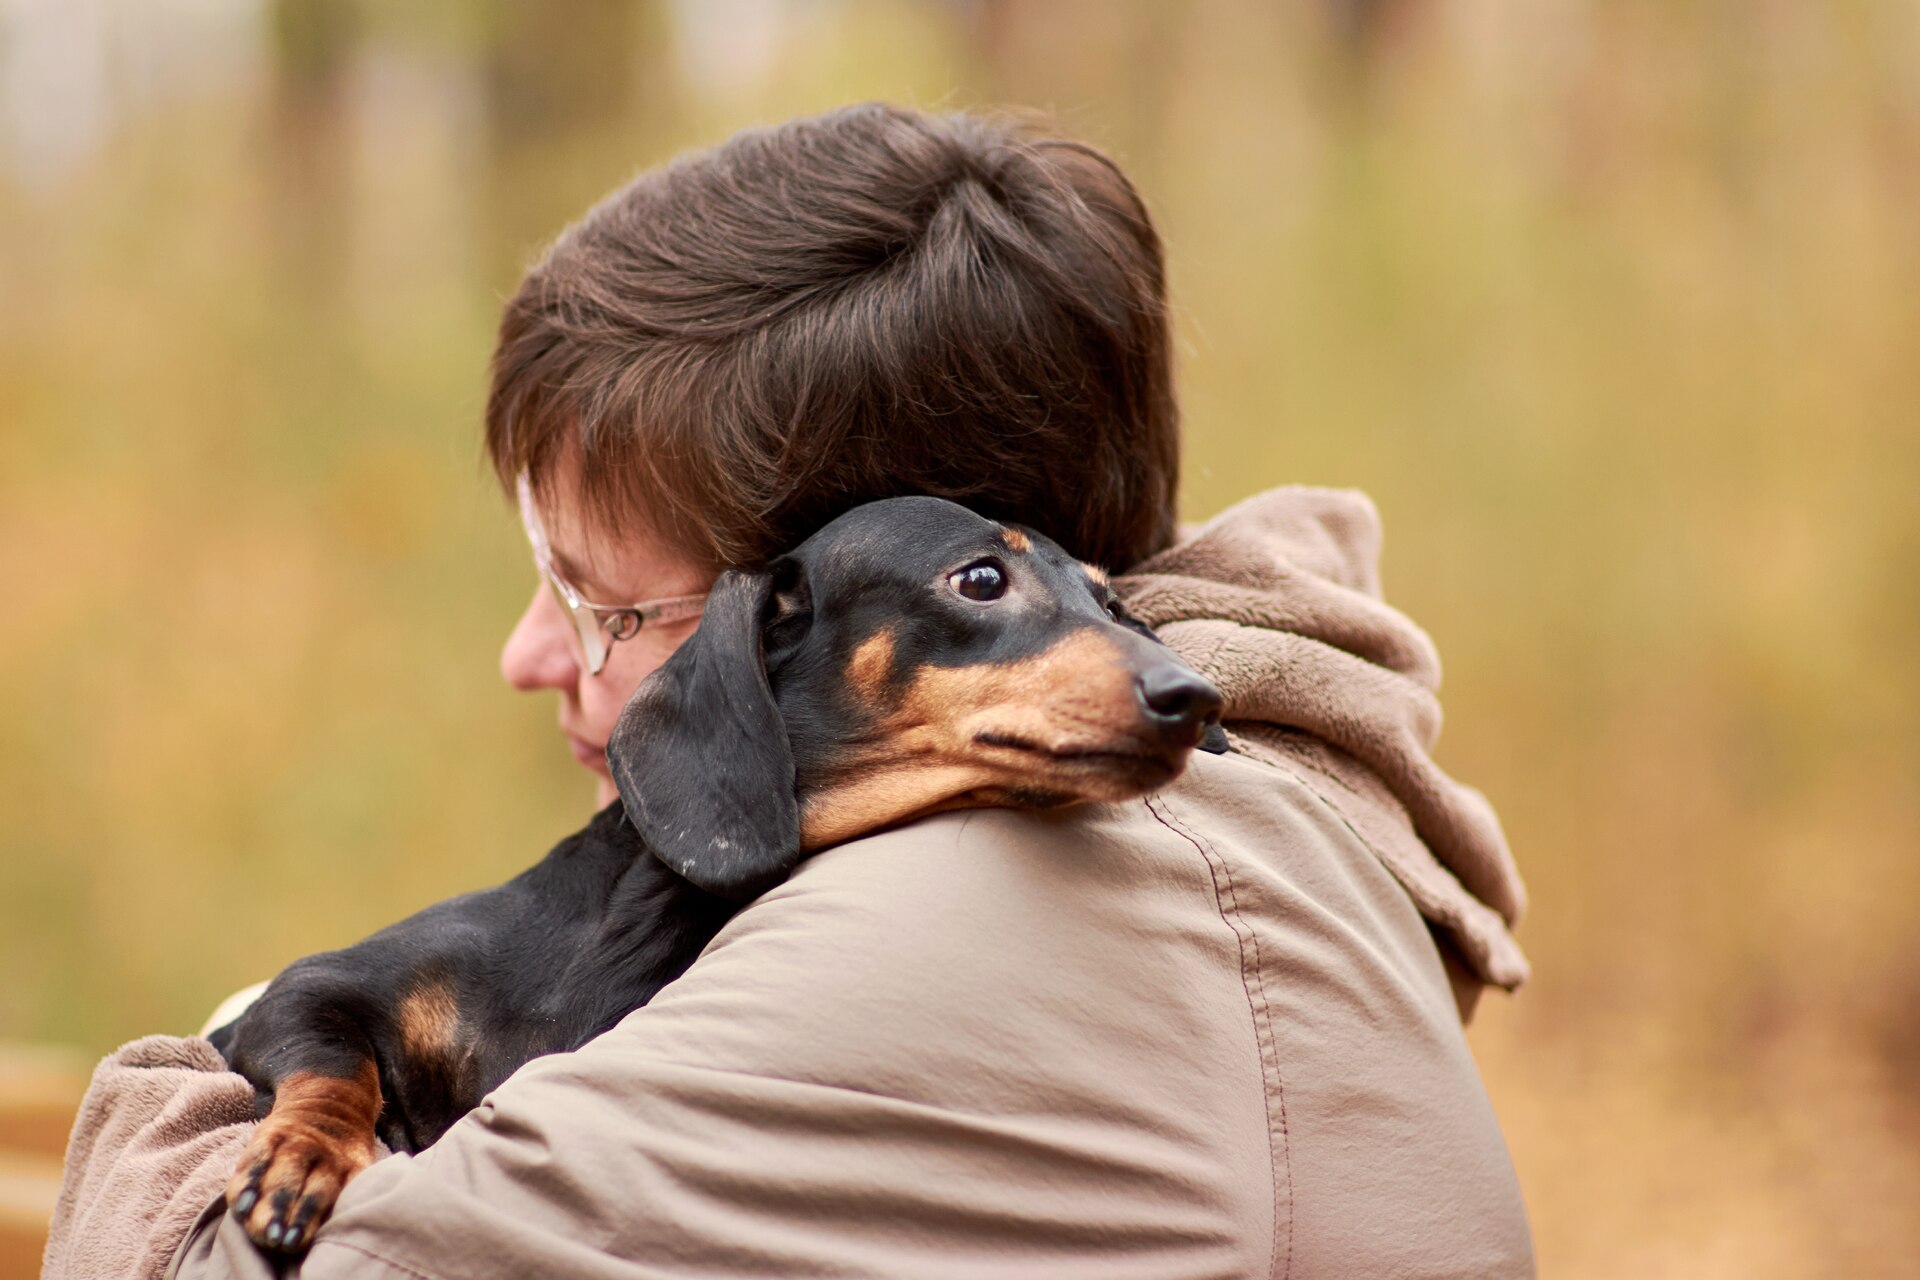 A woman reunited with her lost dog